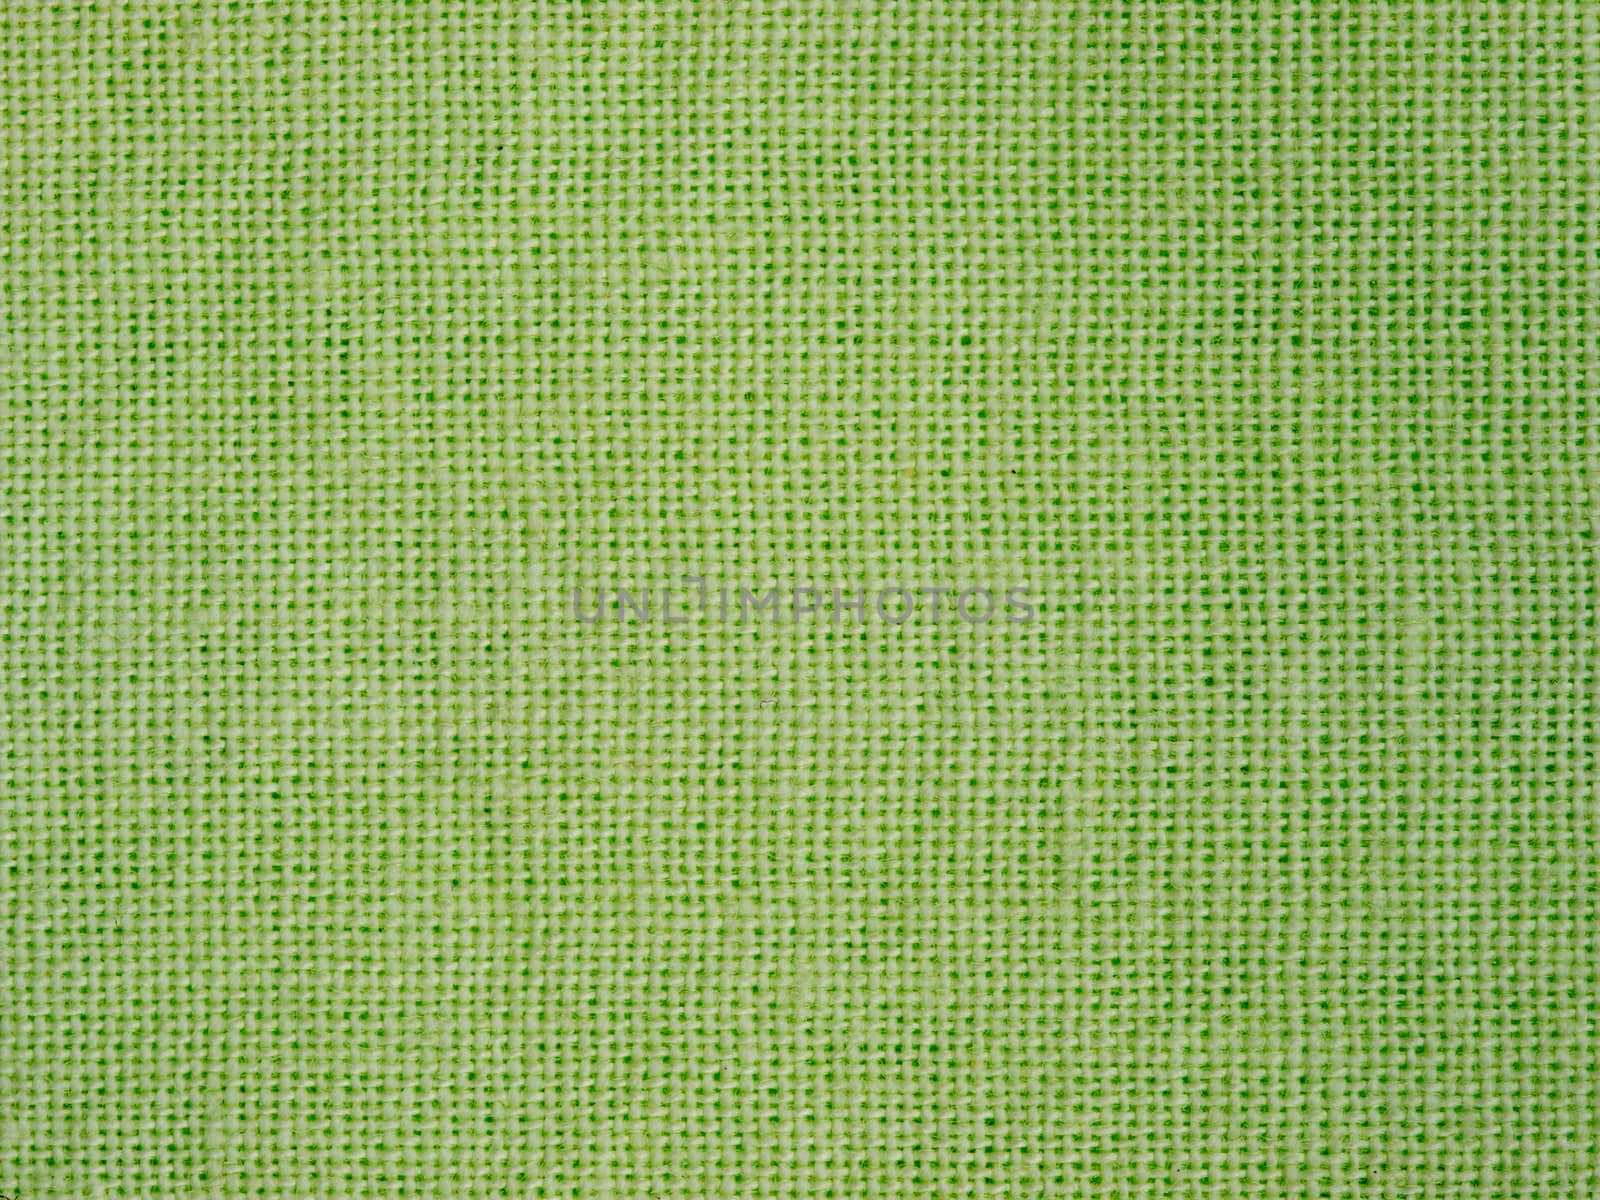 Natural green cotton fabric weaving close up as background texture